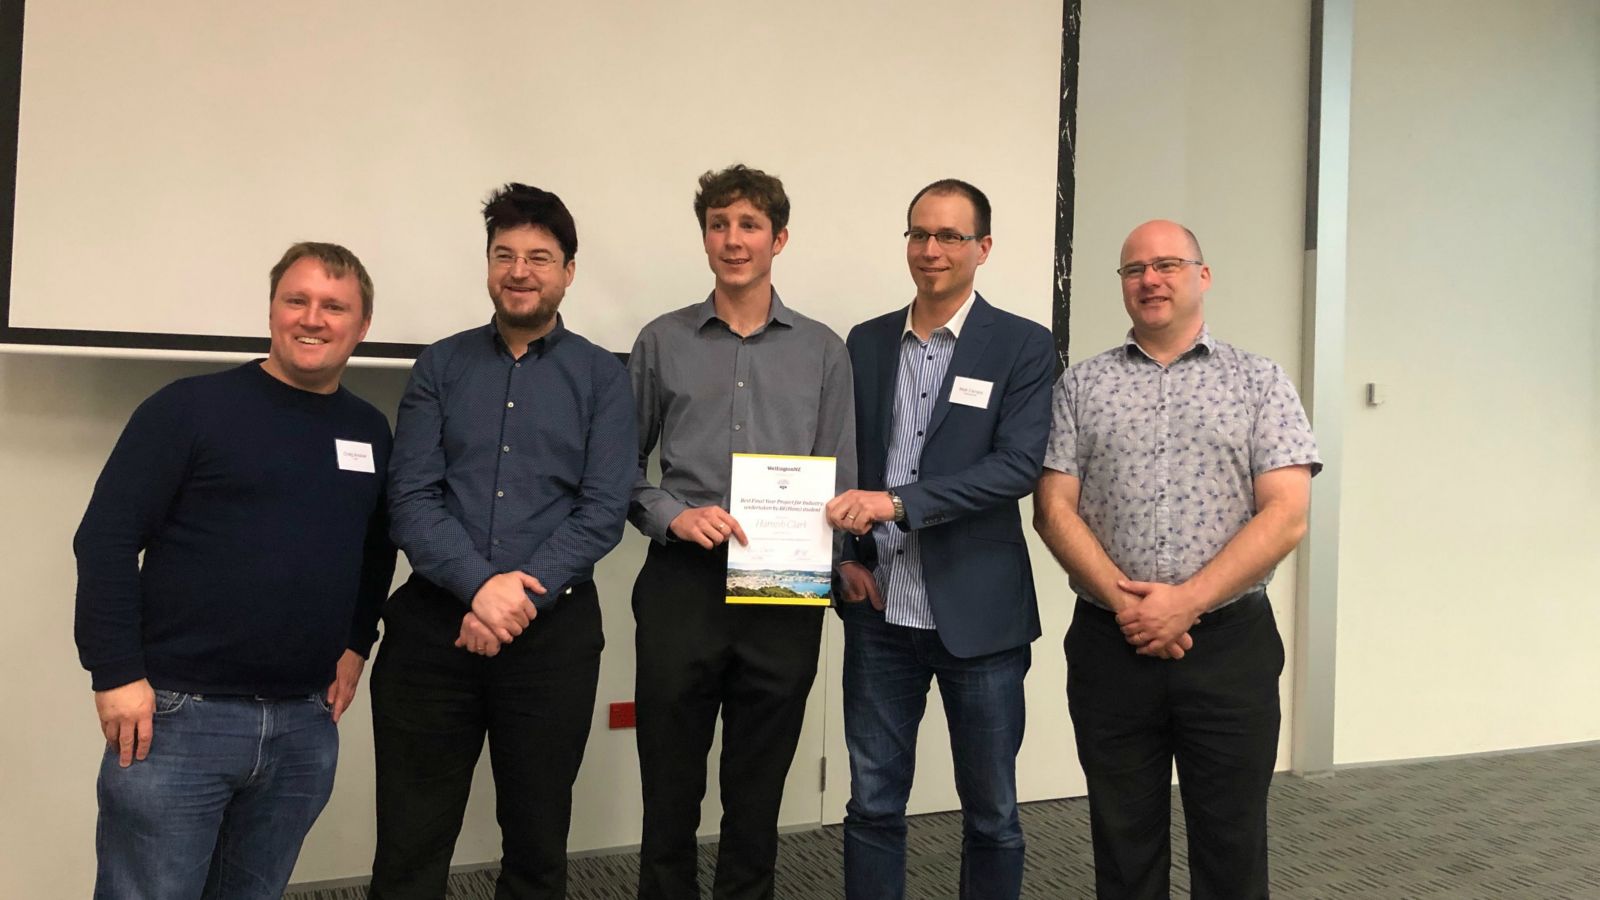 A group of five men stand with a certificate: Hamish Clark, centre, with SECS and WellingtonNZ staff after being presented with the Best Industry Project award.